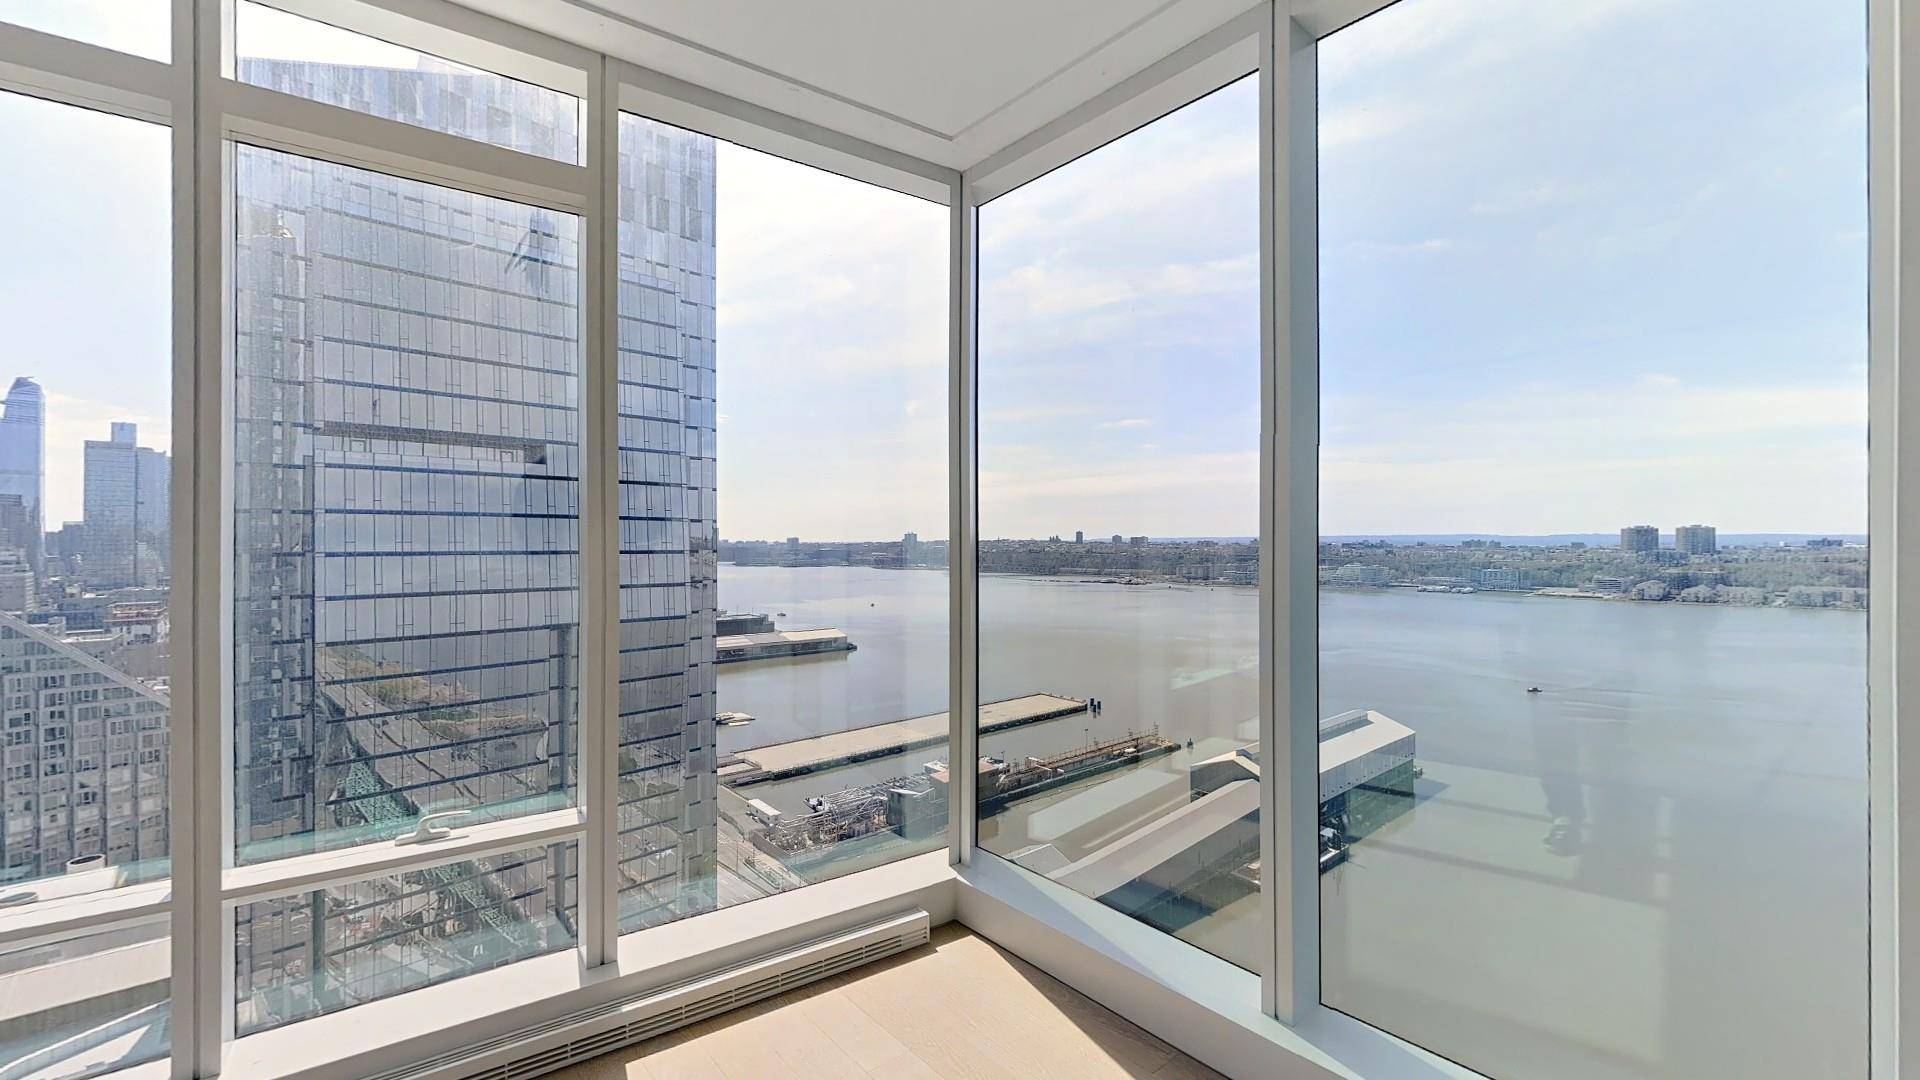 This corner residence enjoys western Hudson River views and southern views across Waterline Square Park through floor to ceiling windows in every room.